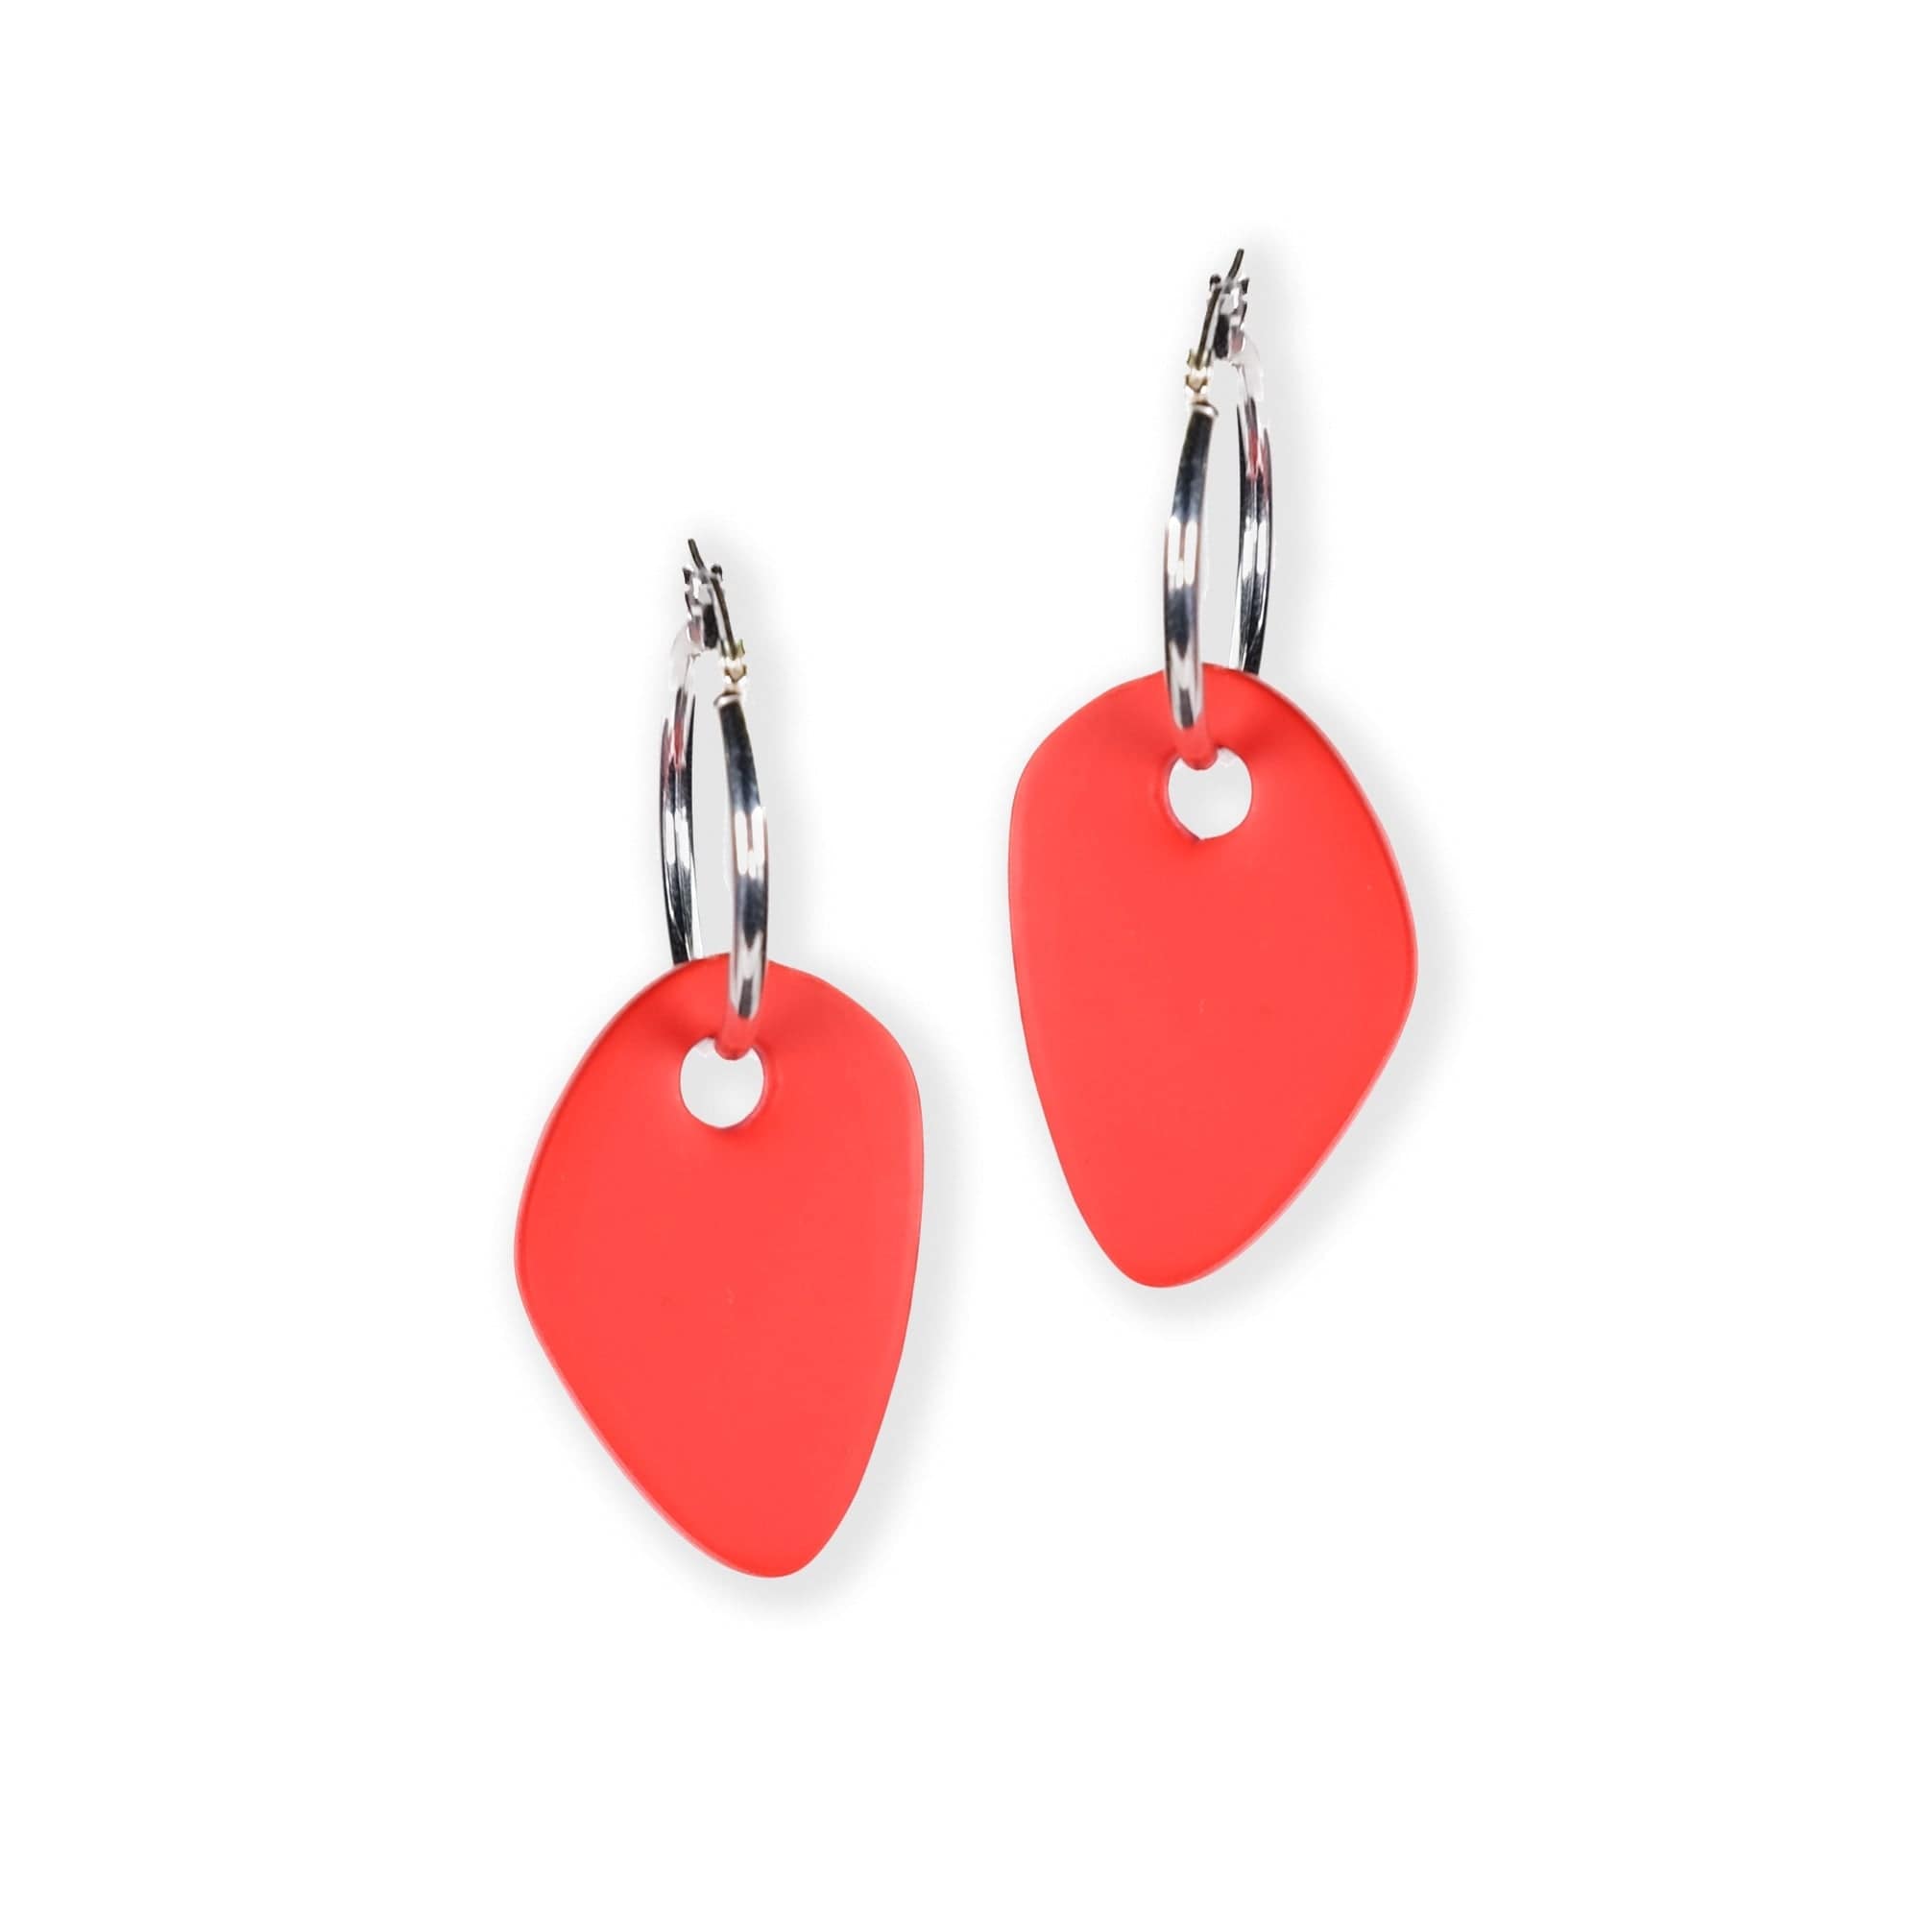 Organic shapes, hoop charm dangly earrings Calder inspired in red #color_red